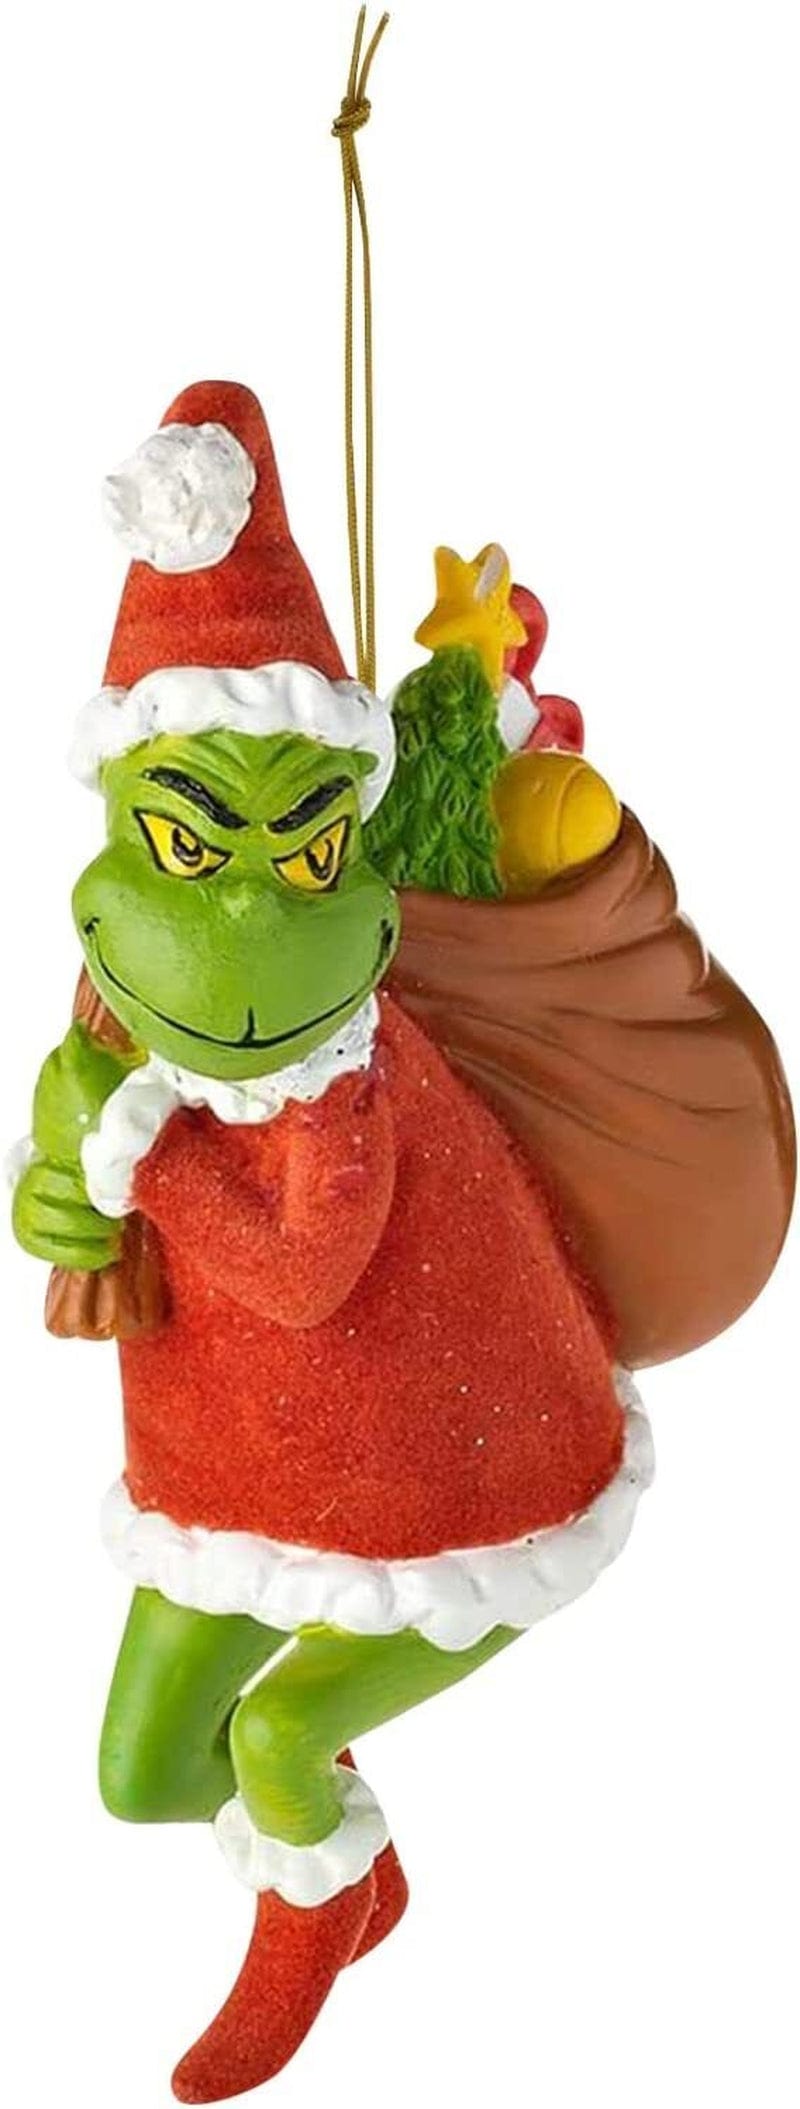 Christmas Grinch Ornaments,Grinch Stole Christmas,Grinch Decorations for Christmas Tree,Merry Christmas Hanging Decor  RAML